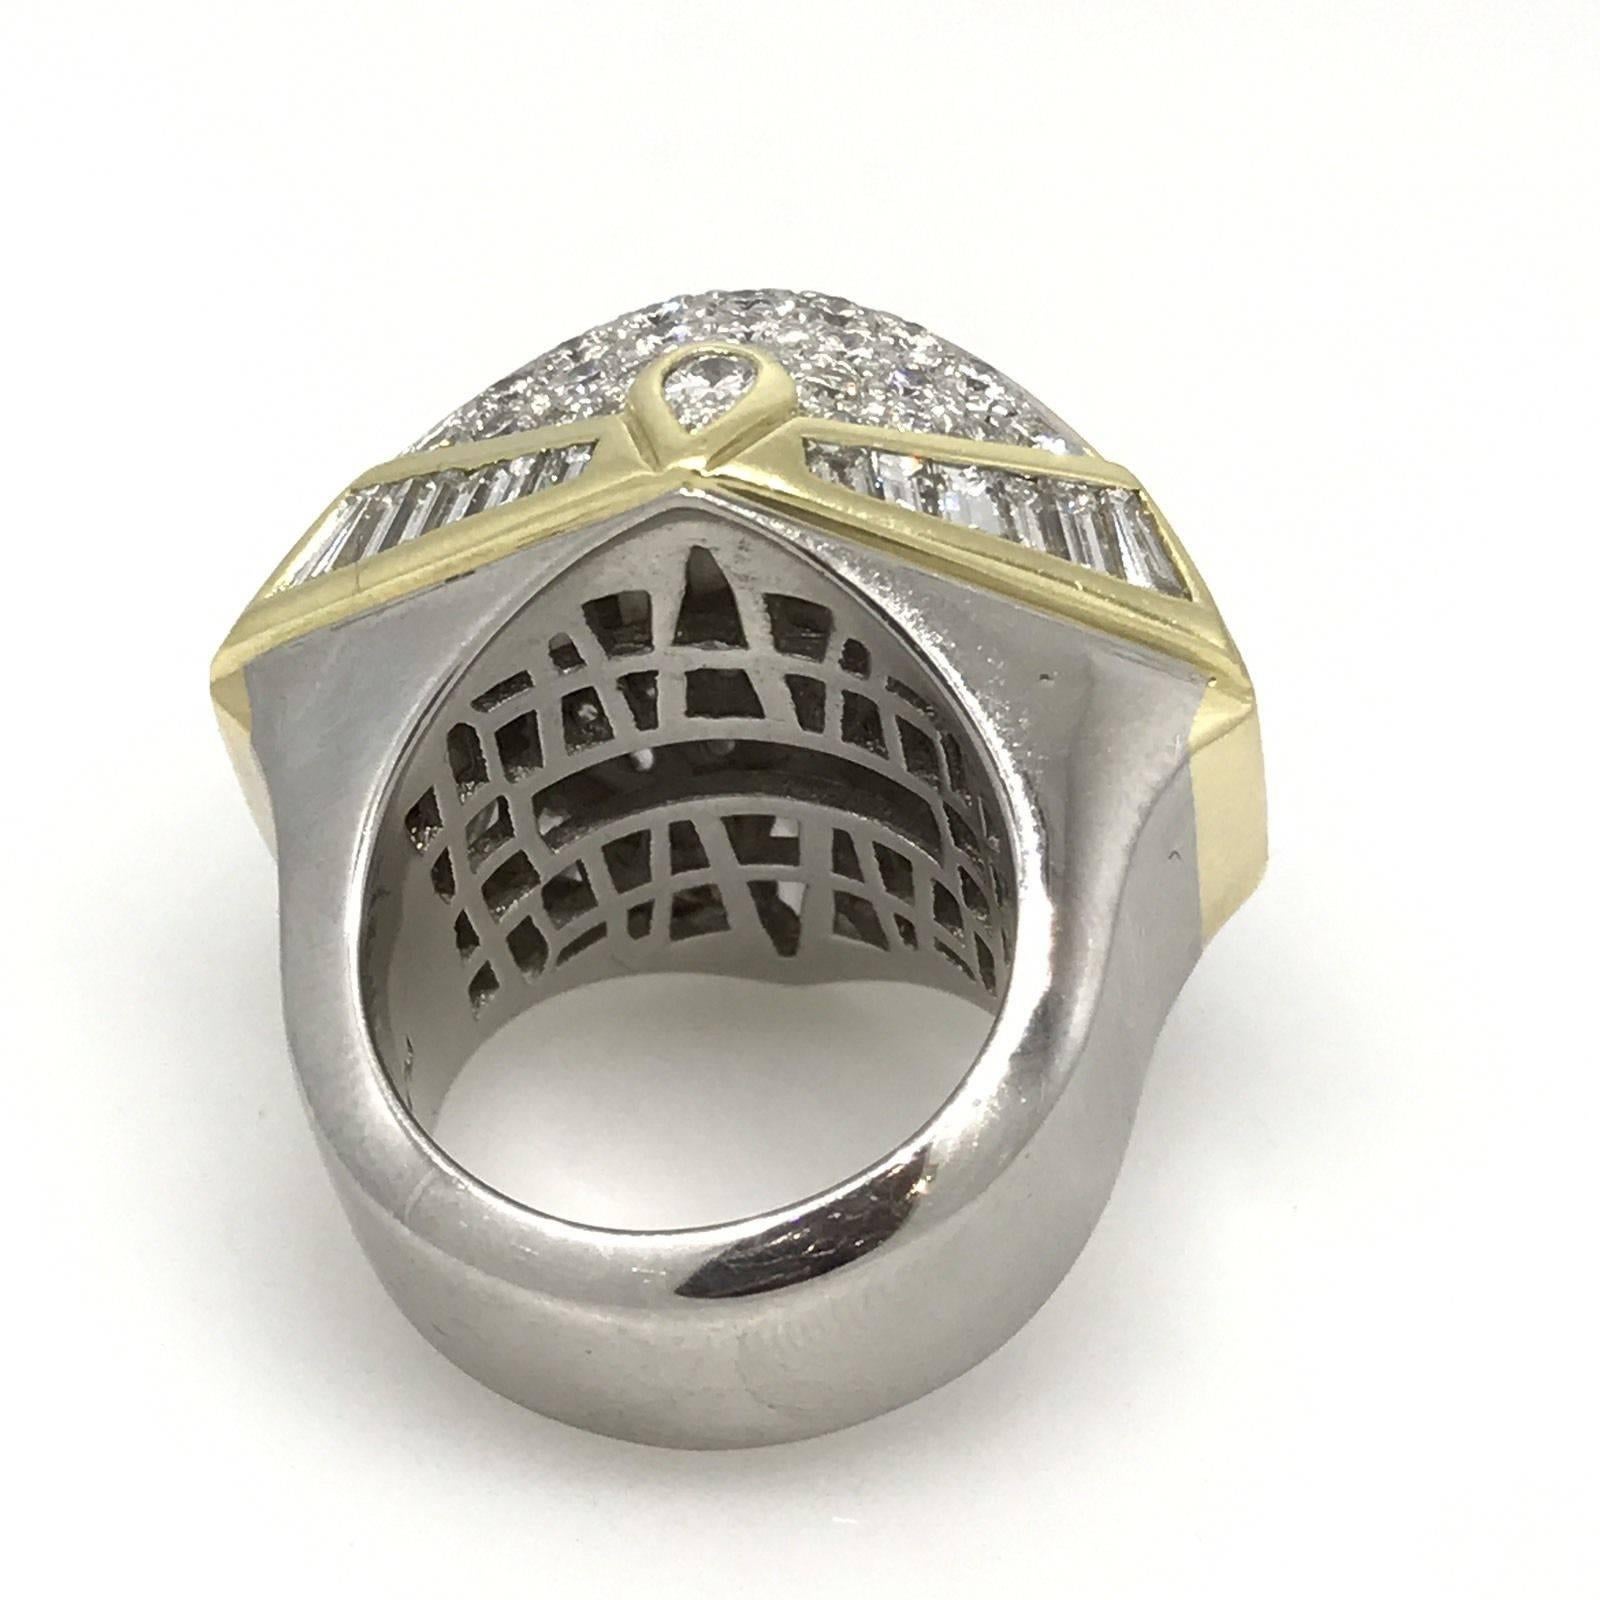 Large Diamond Dome Ring set in Platinum with 18k Yellow Gold Accents. Ring contains three rows of large Princess cut Diamonds, pave set Round Brilliants,  graduating Baguette Diamonds, and two Pear Shape Diamonds.
Total Diamond weight is 9.91